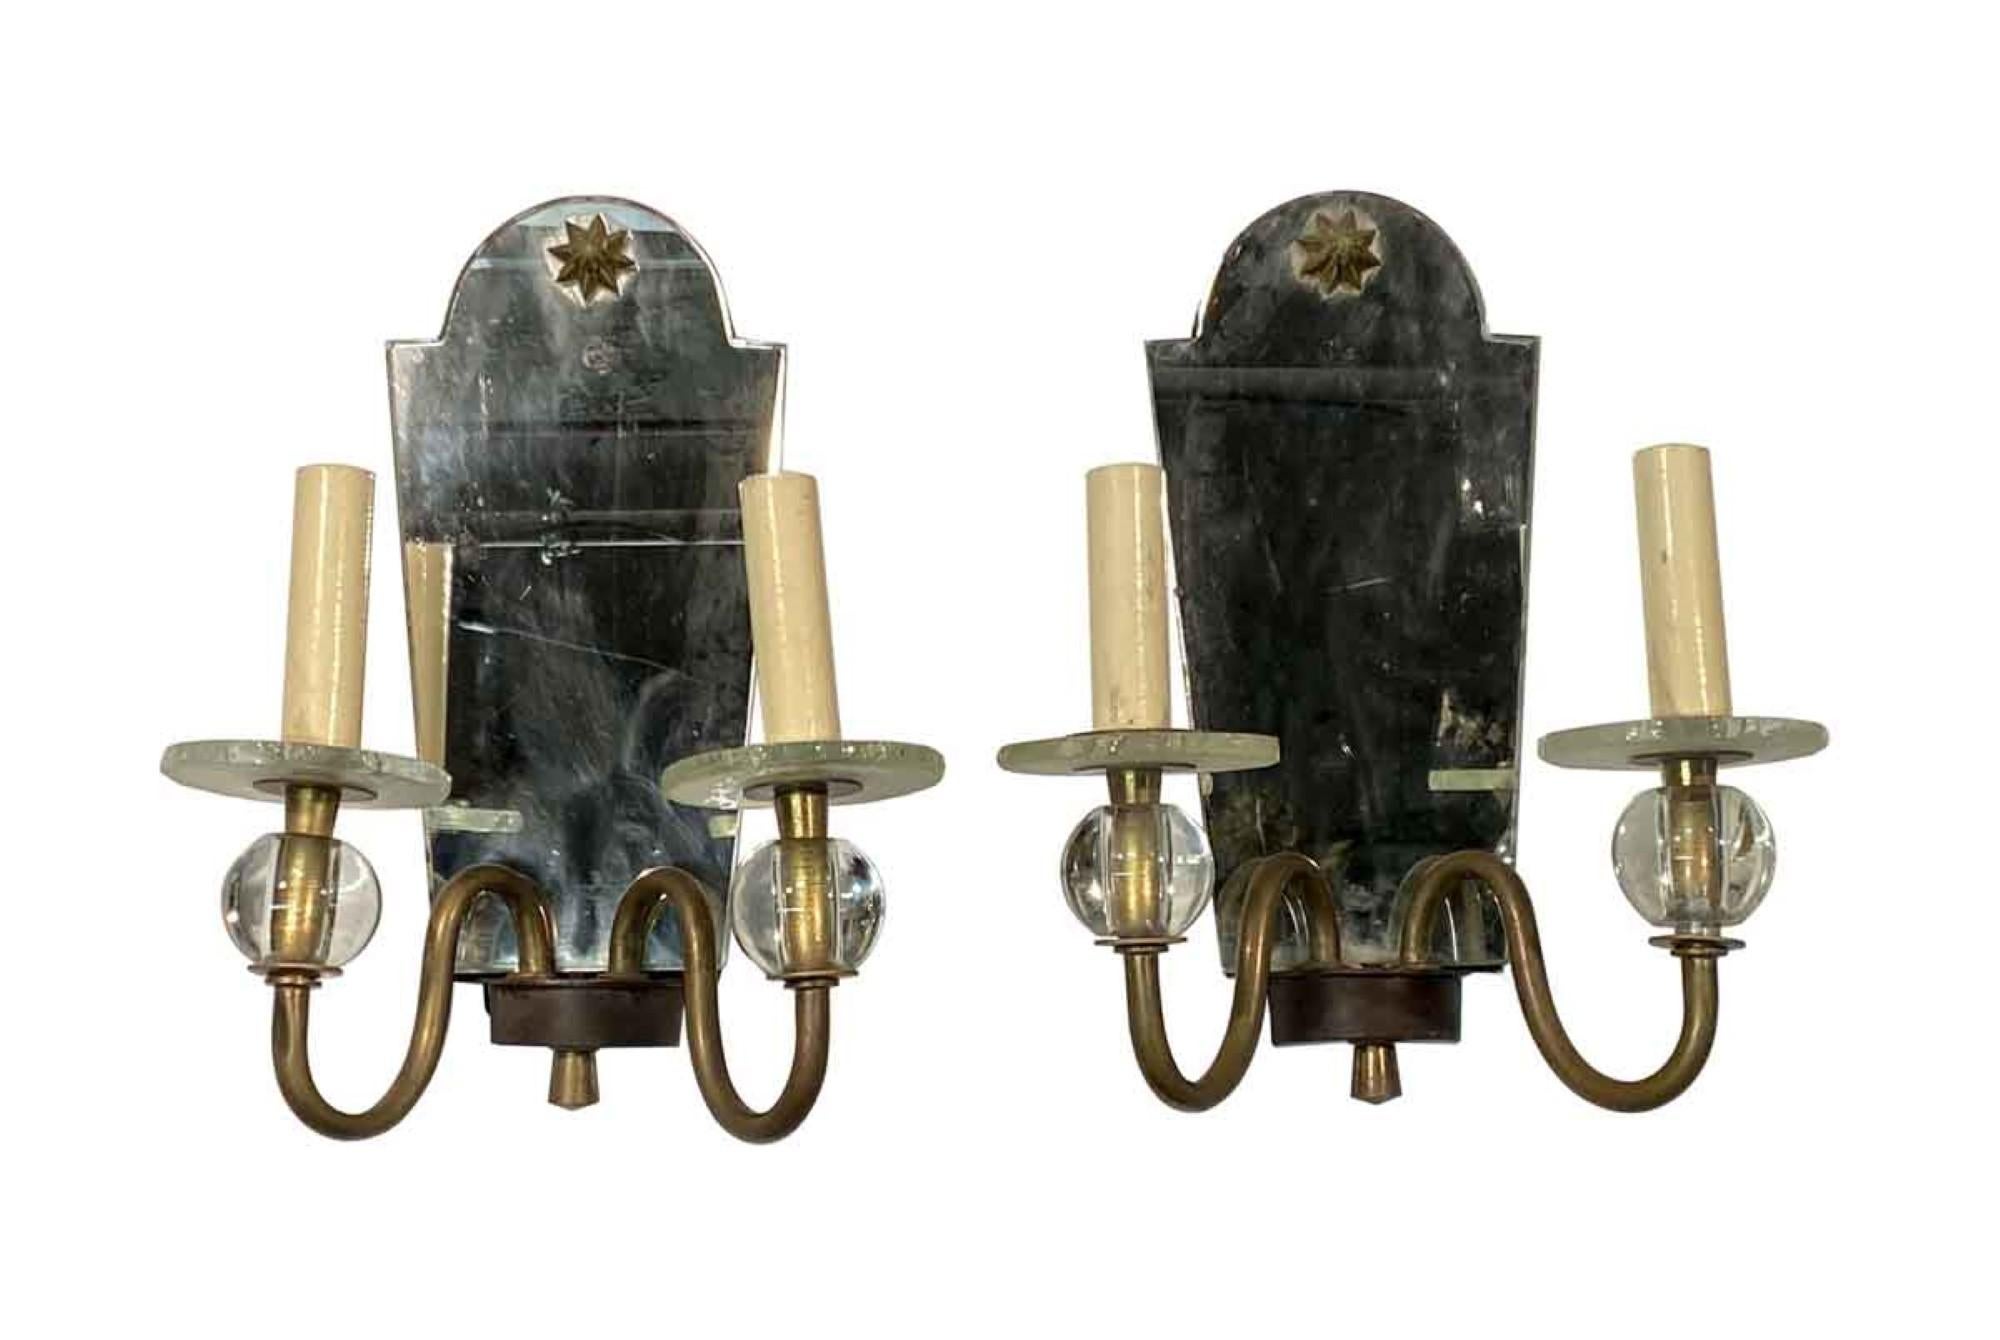 1910s French pair of mirrored wall sconces with two slender brass arms and a brass star motif. This can be seen at our 400 Gilligan St location in Scranton, PA.